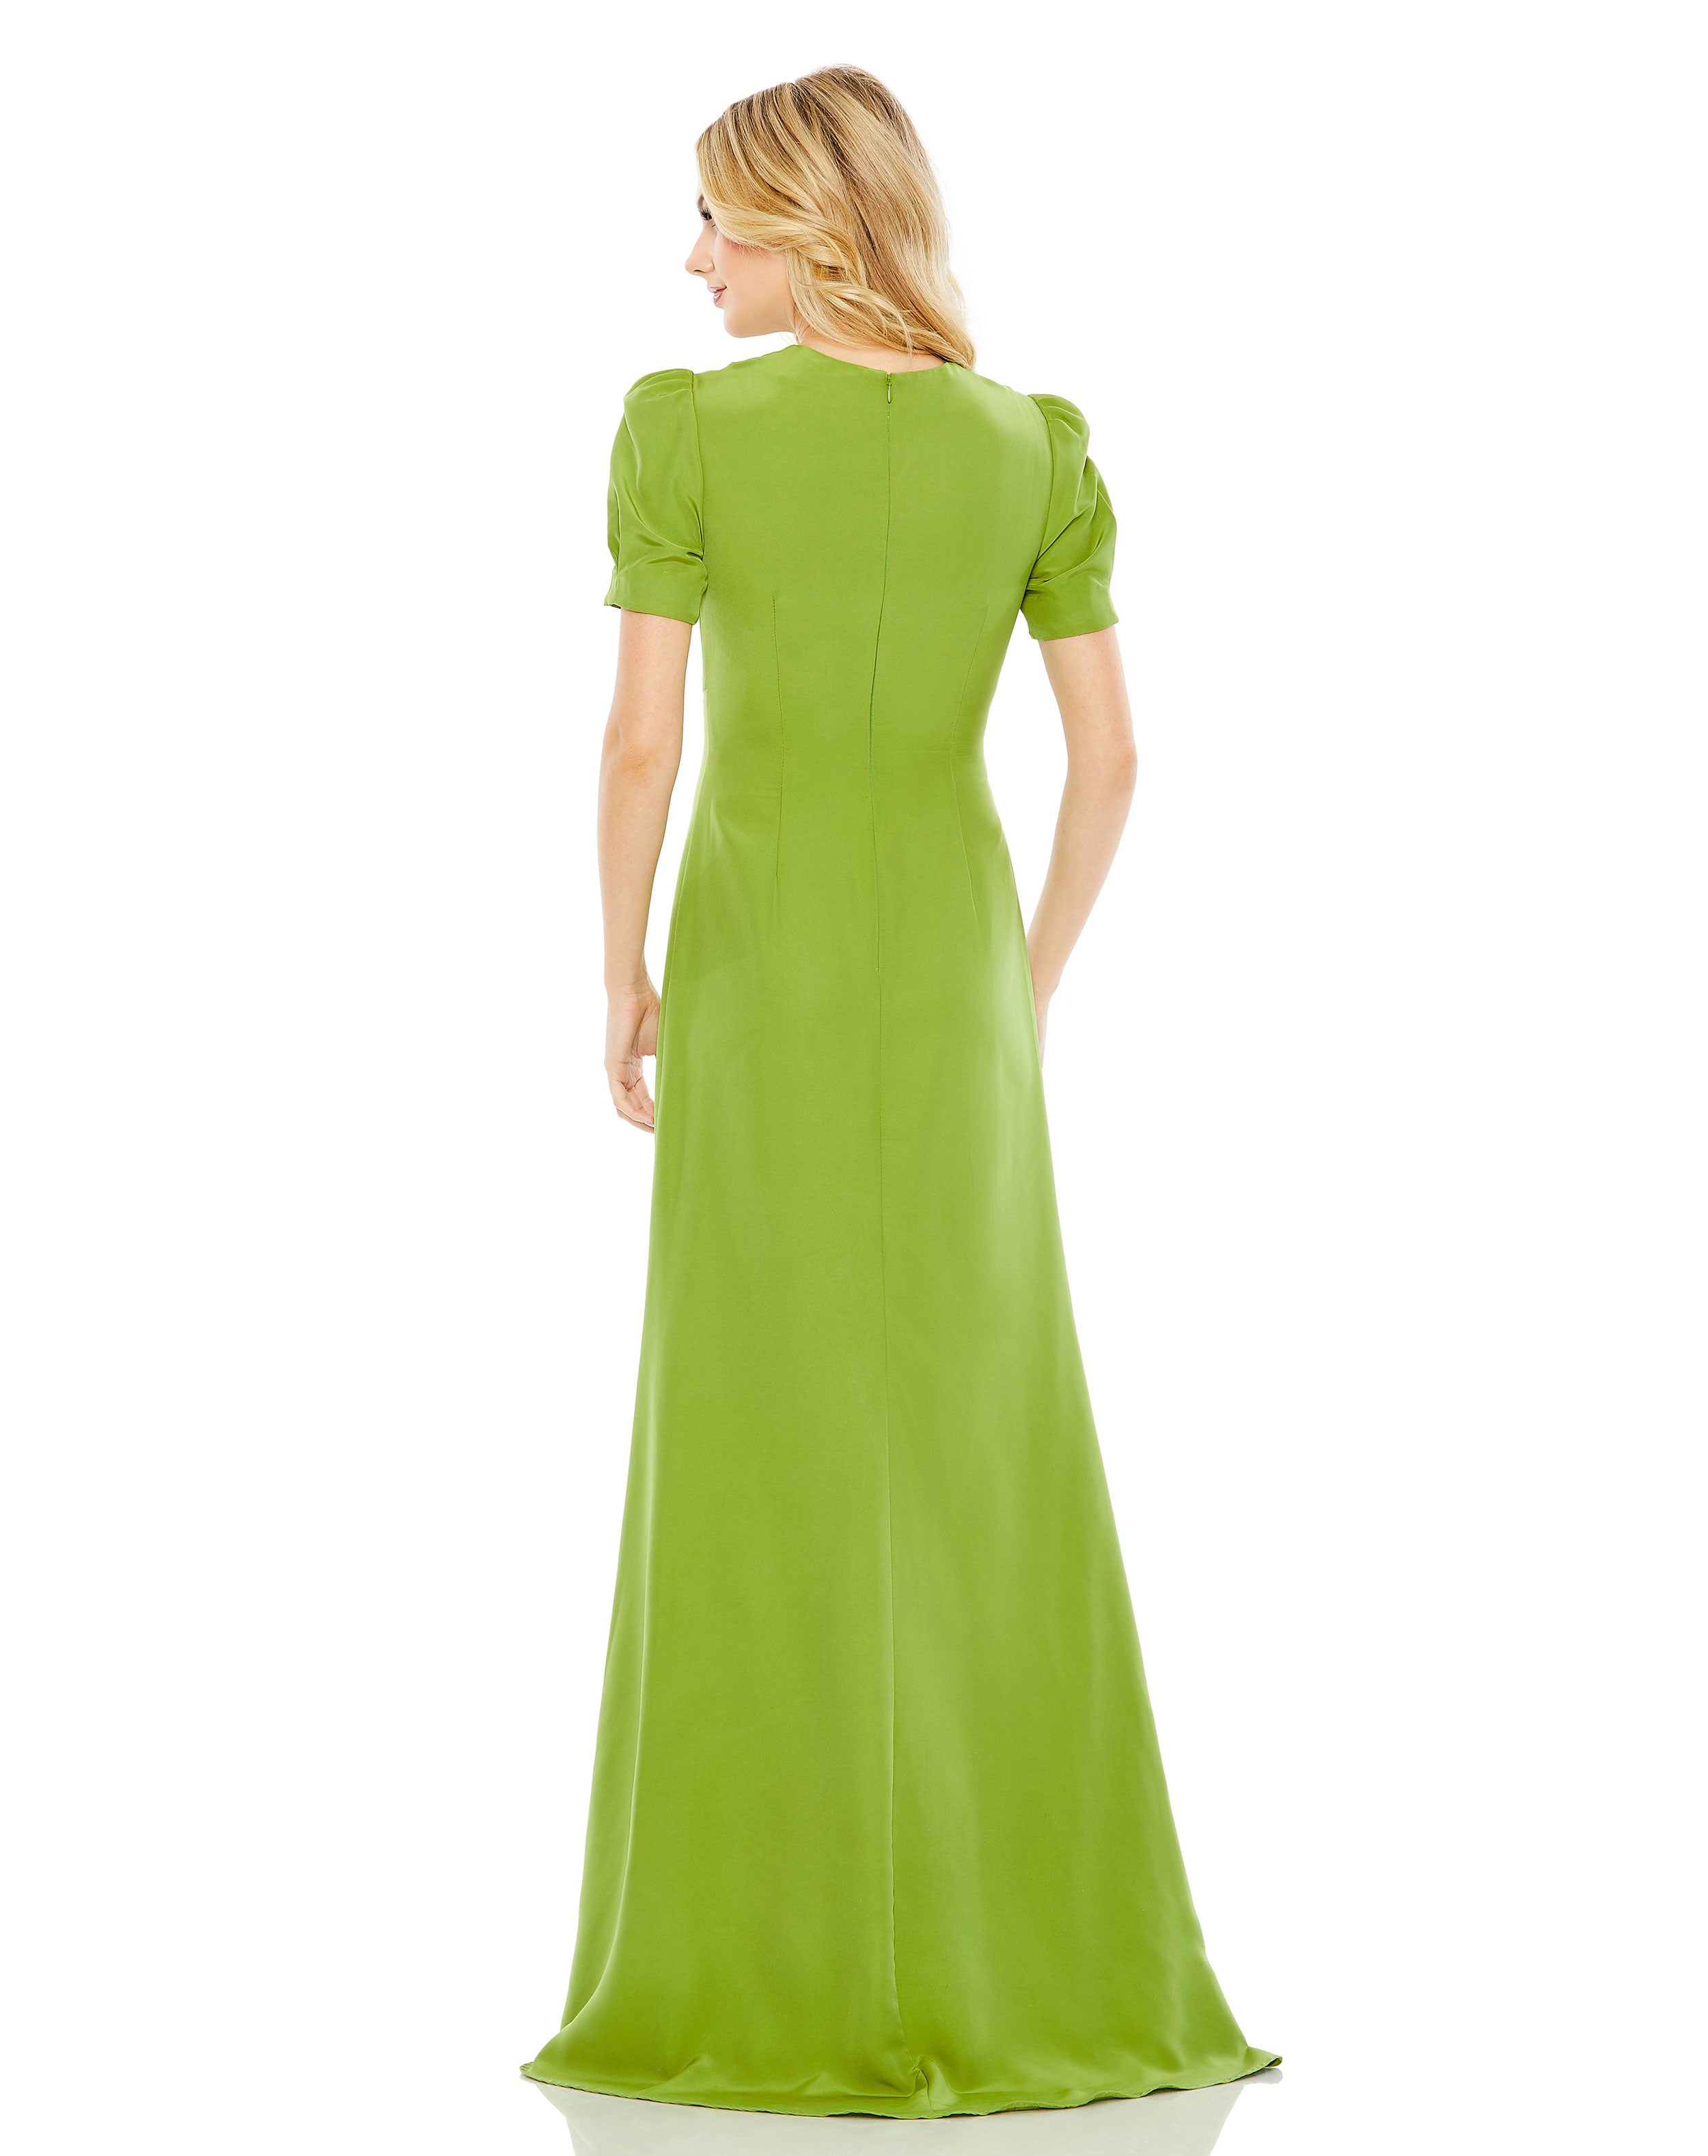 Plunge Neck Puff Sleeve Cut Out Gown - FINAL SALE